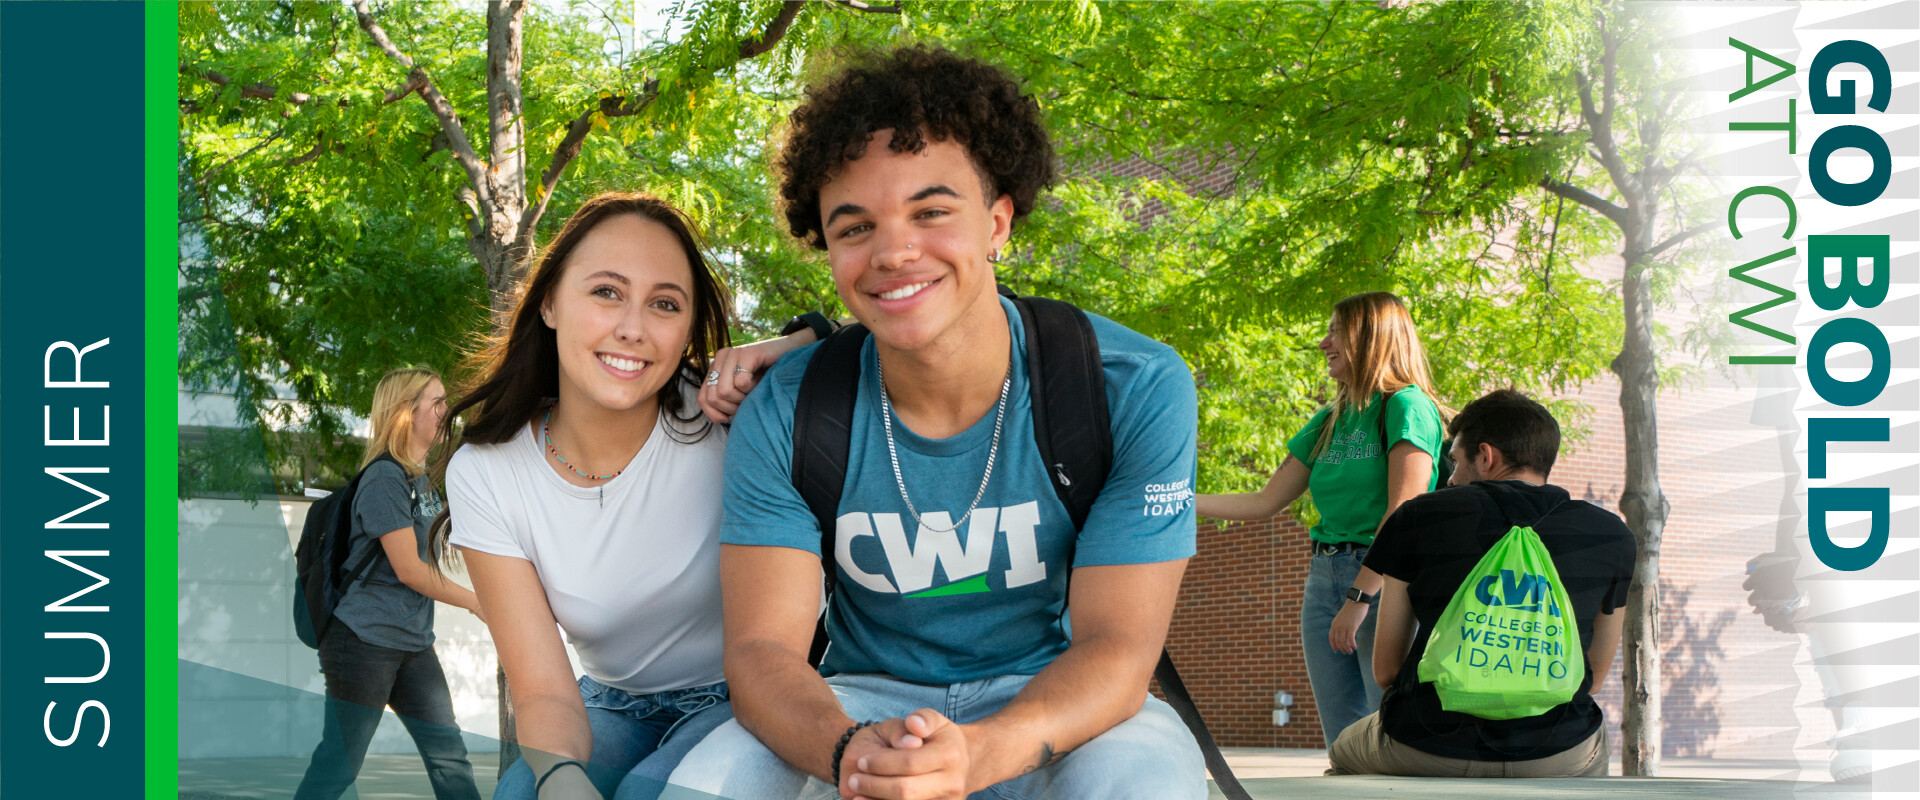 CWI Students enjoying a summer day on campus.